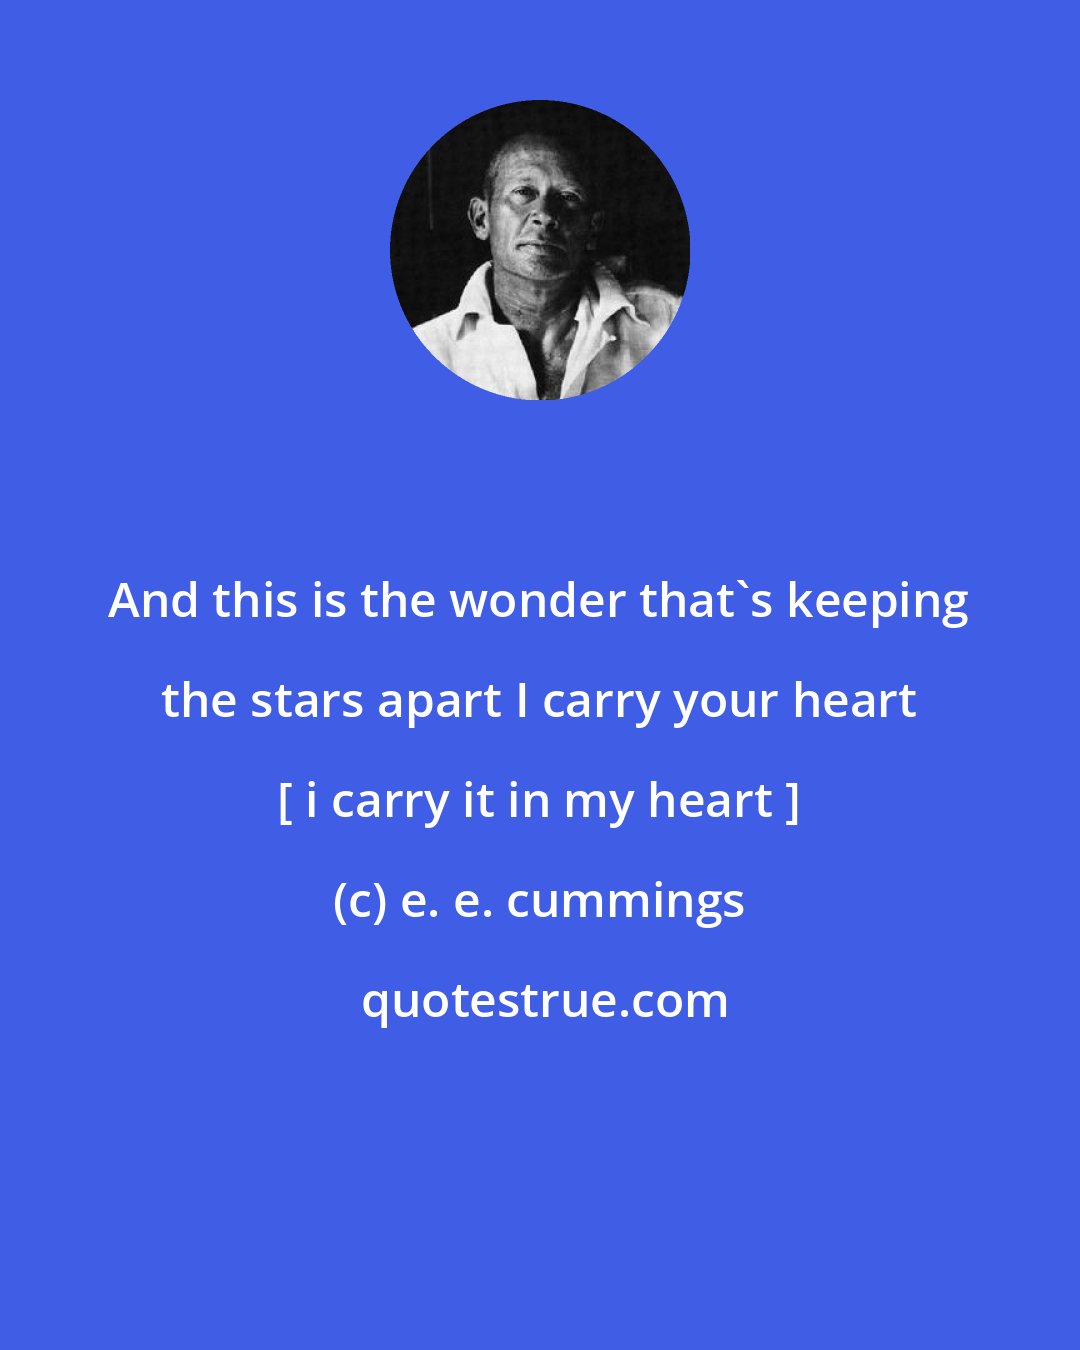 e. e. cummings: And this is the wonder that's keeping the stars apart I carry your heart [ i carry it in my heart ]